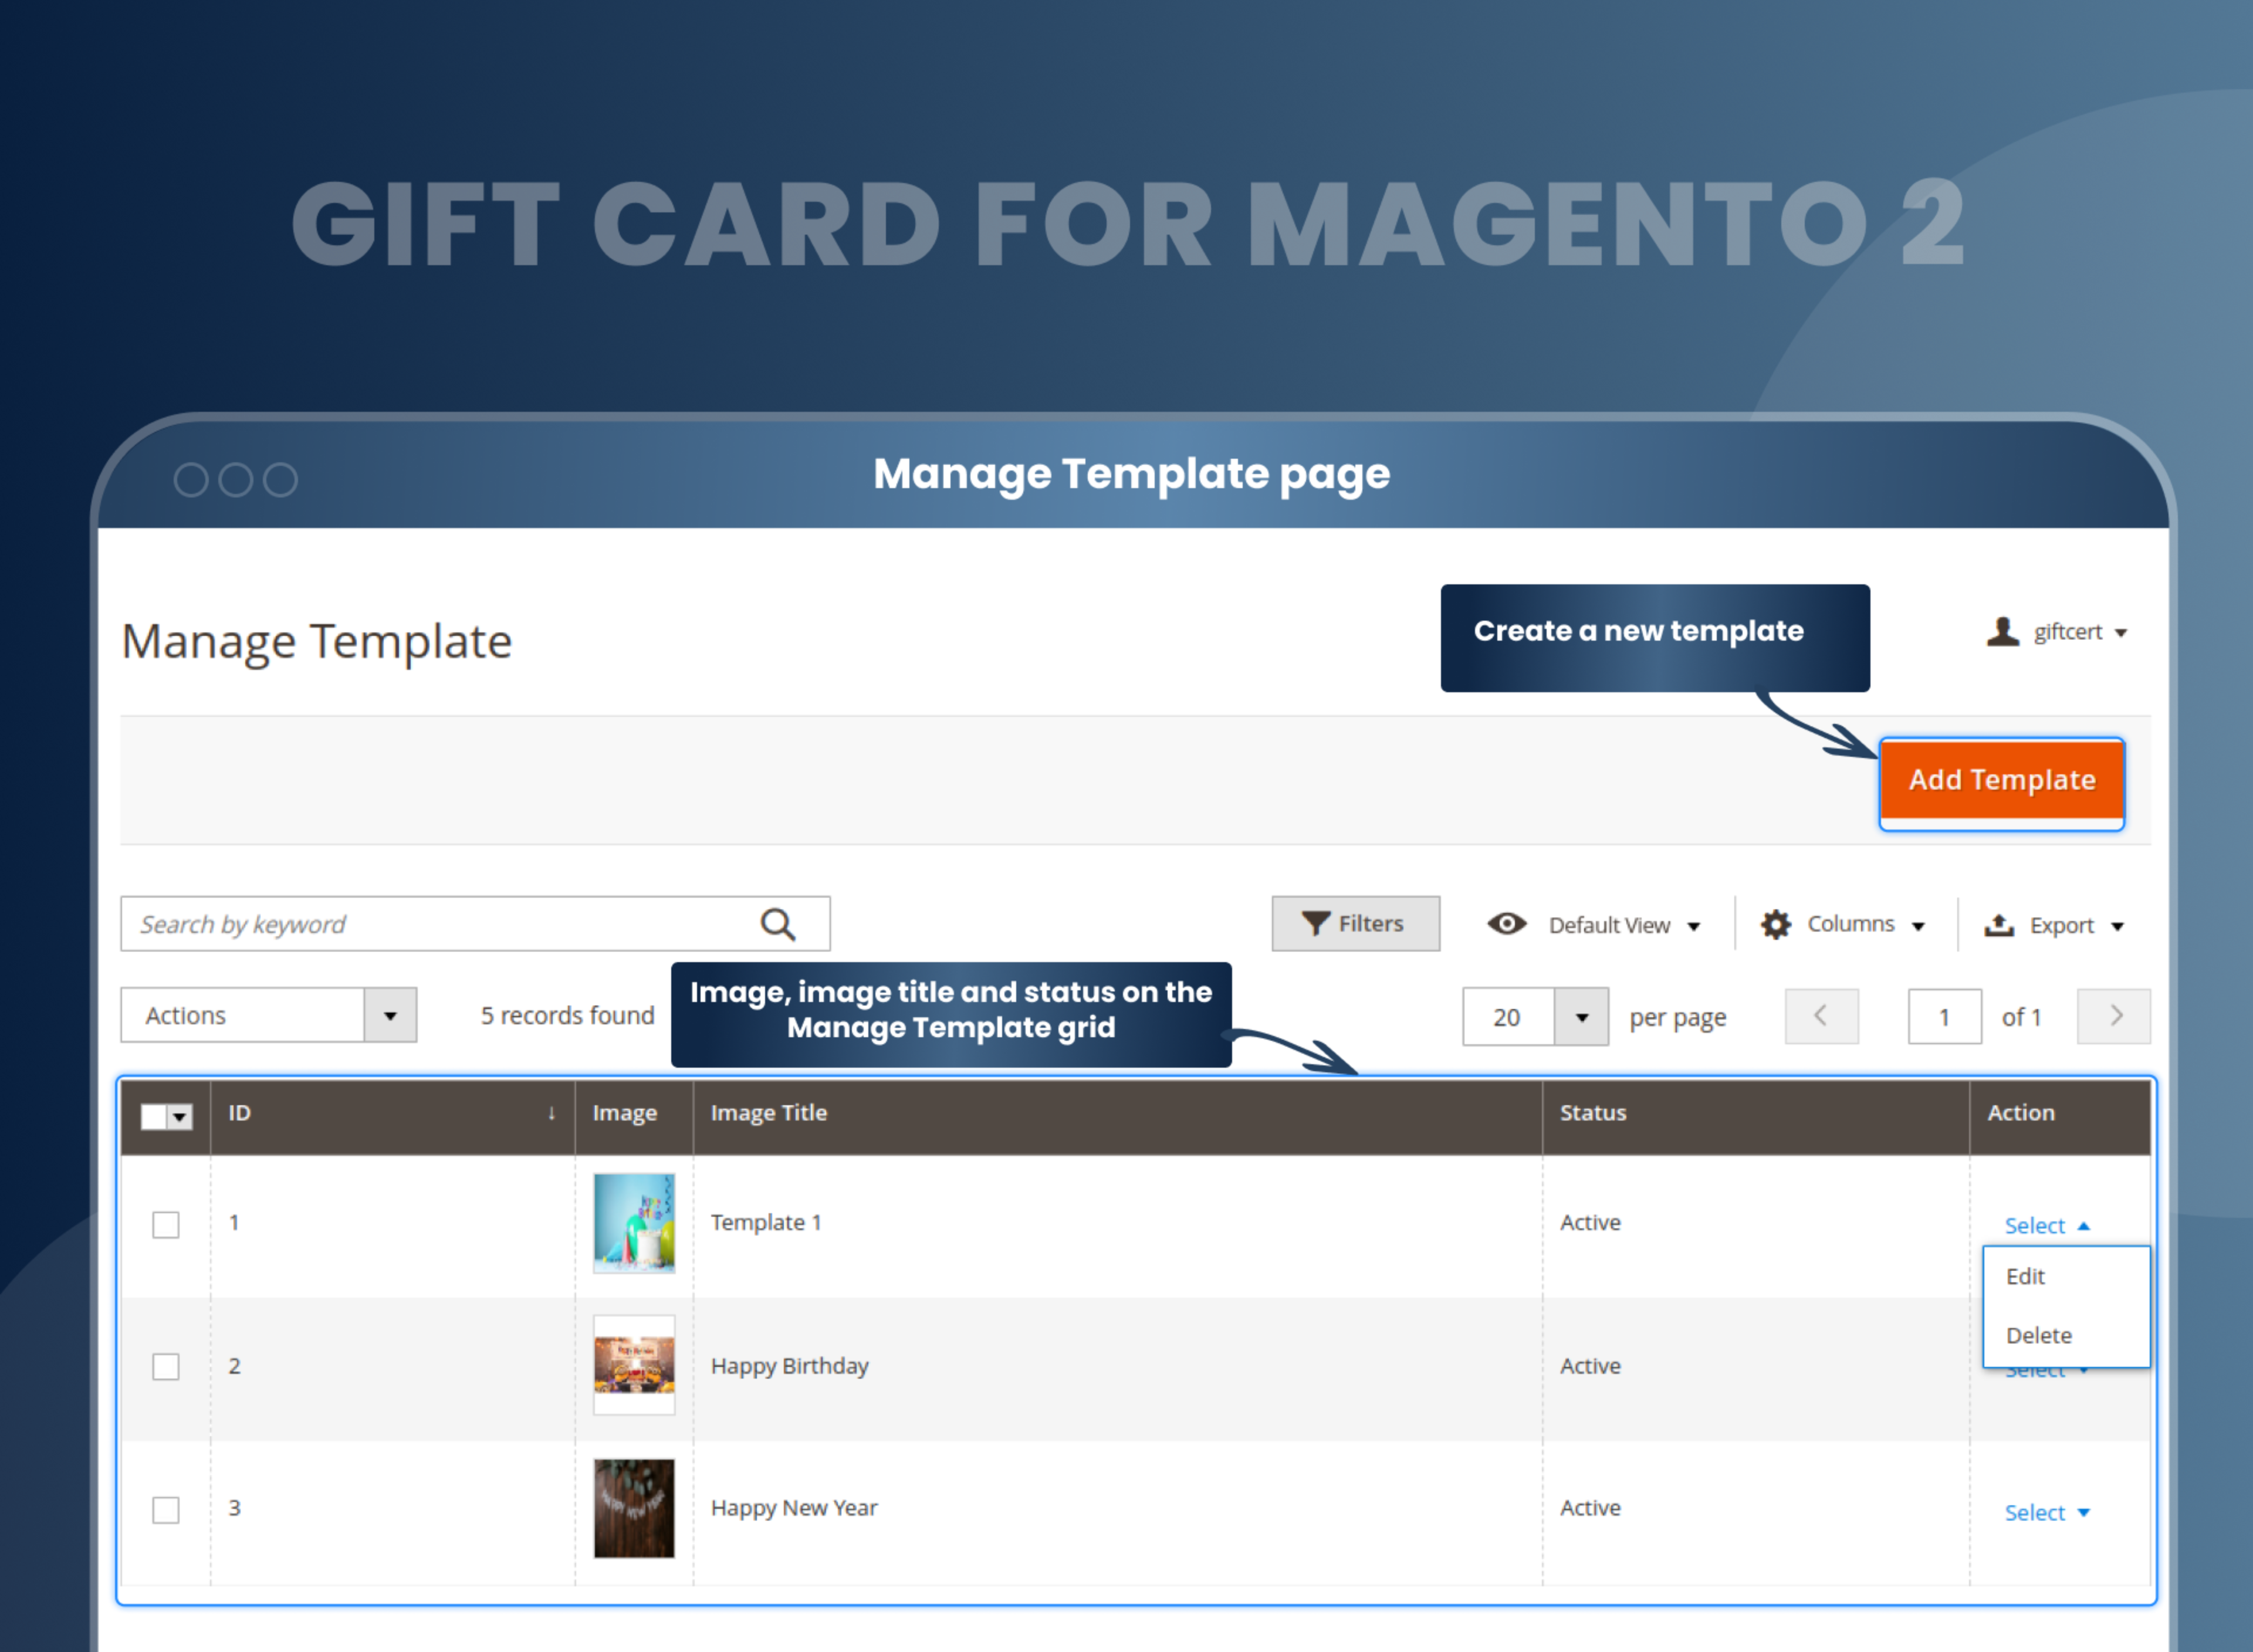 Manage Template page